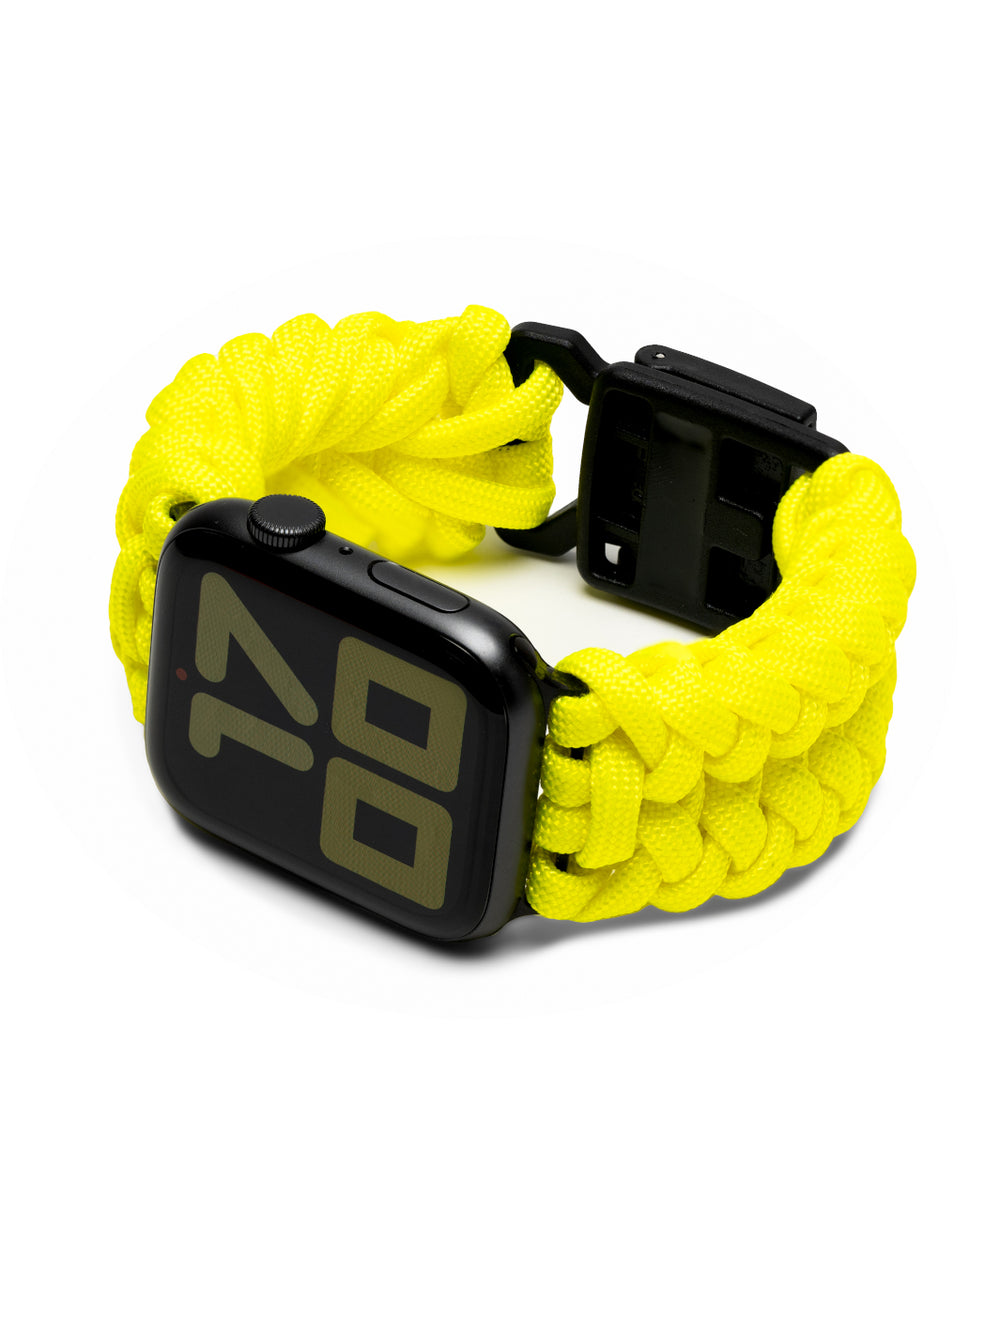 Strapcord Ribs Apple Watch Strap Article 011 Rave Yellow 2 1065 x 1420